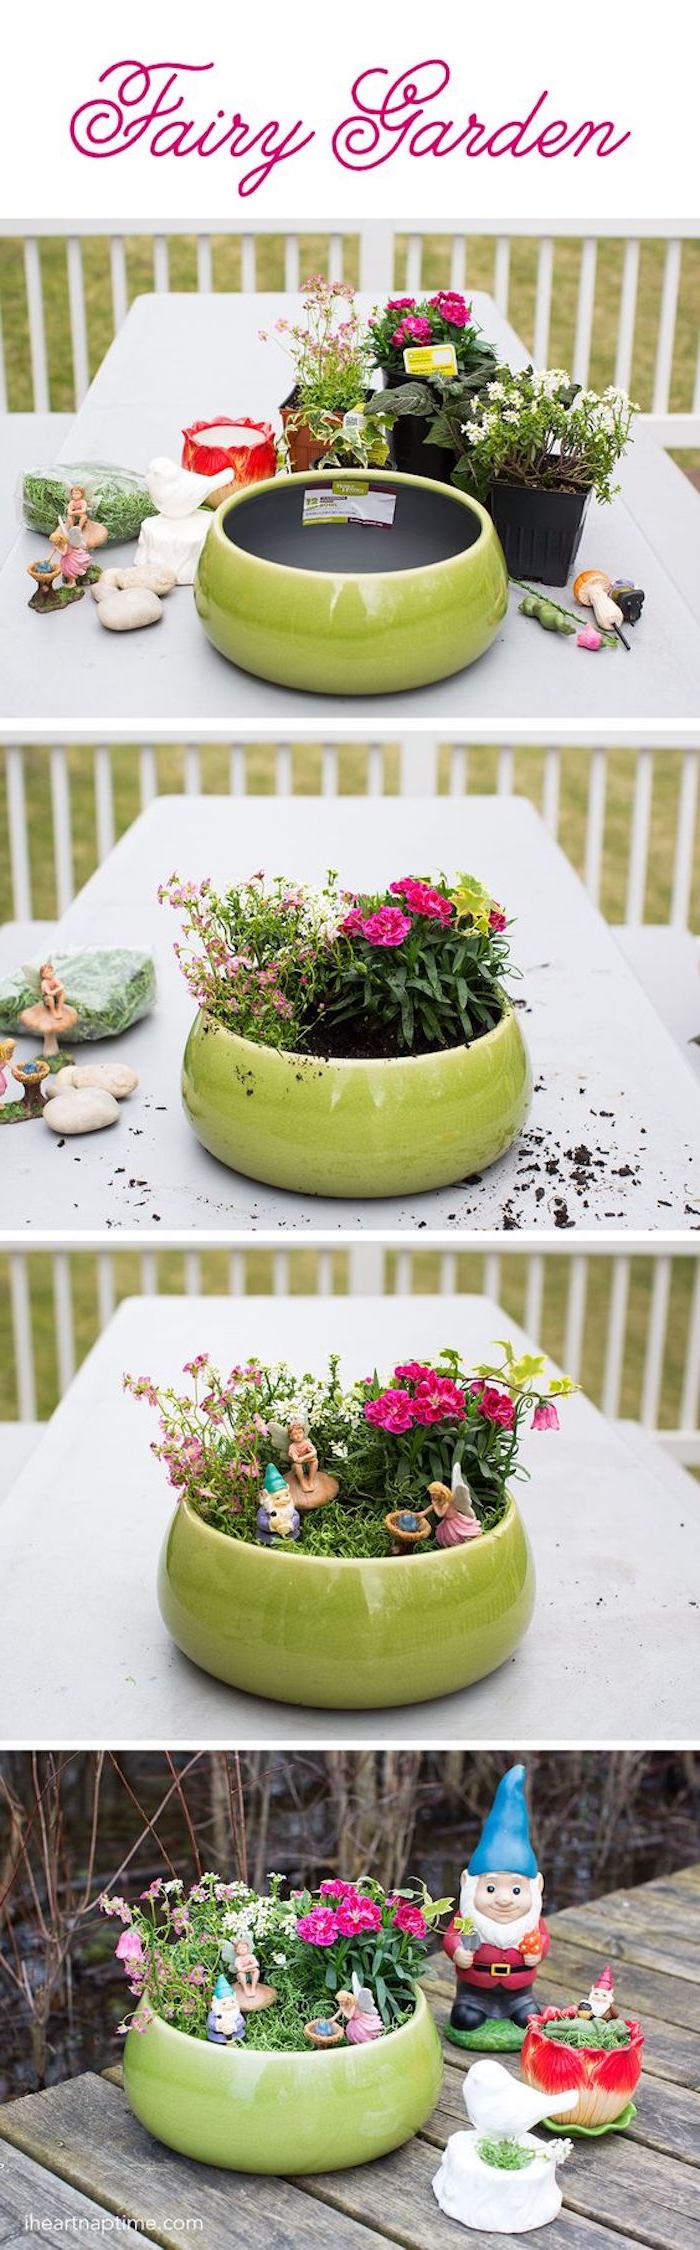 four photos explaining how to make a fairy garden, large green planting bowl, several potted plants and materials, arranging the plants, decorating with figurnines